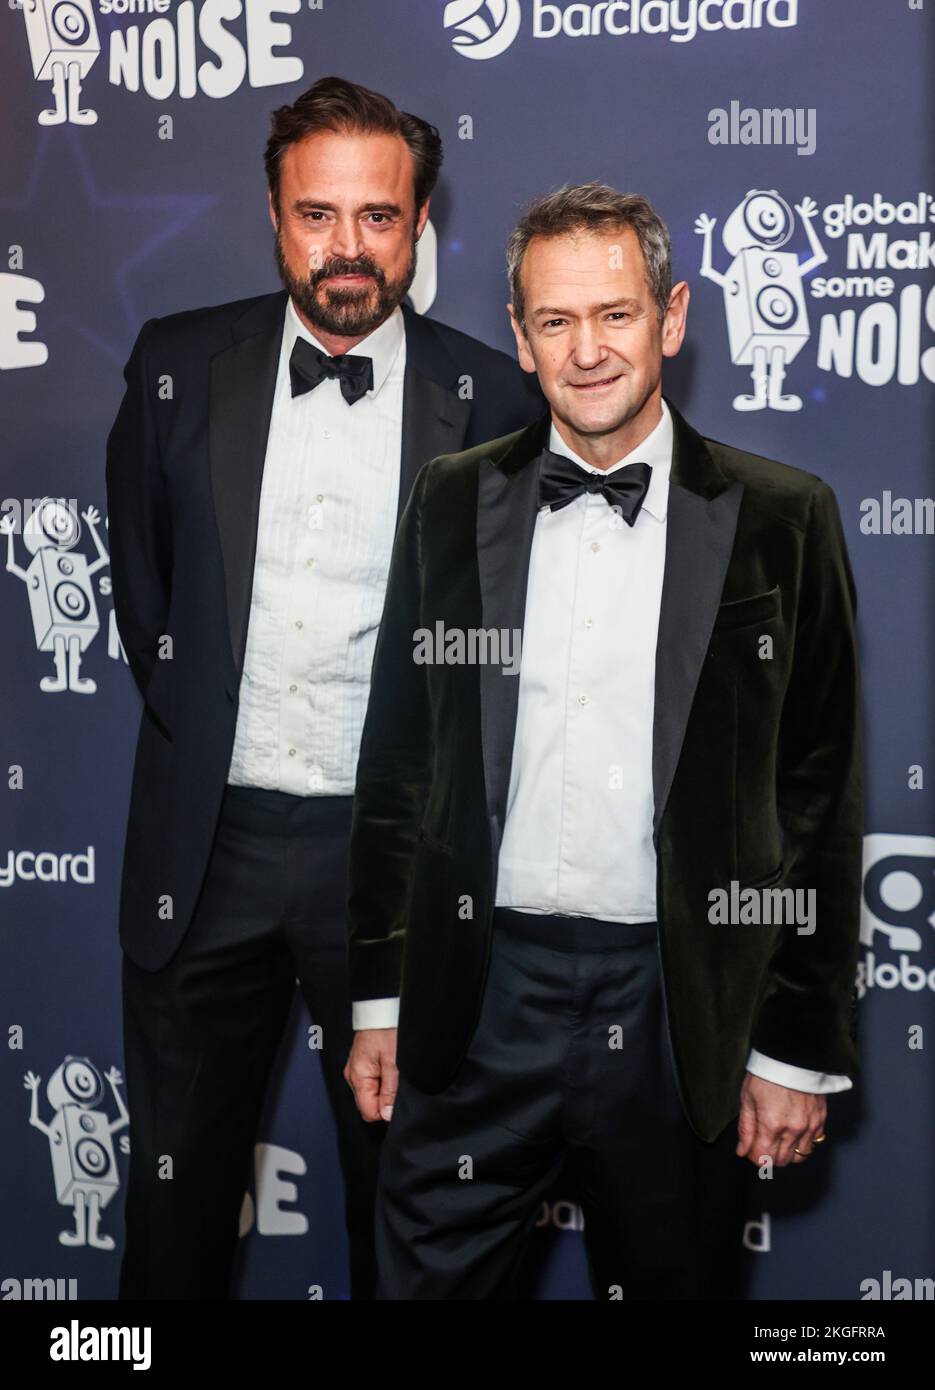 London, UK. 22nd Nov, 2022. Jamie Theakston and Alexander Armstrong attend Global's Make Some Noise Night 2022 at The Londoner Hotel in London. (Photo by Brett Cove/SOPA Images/Sipa USA) Credit: Sipa USA/Alamy Live News Stock Photo